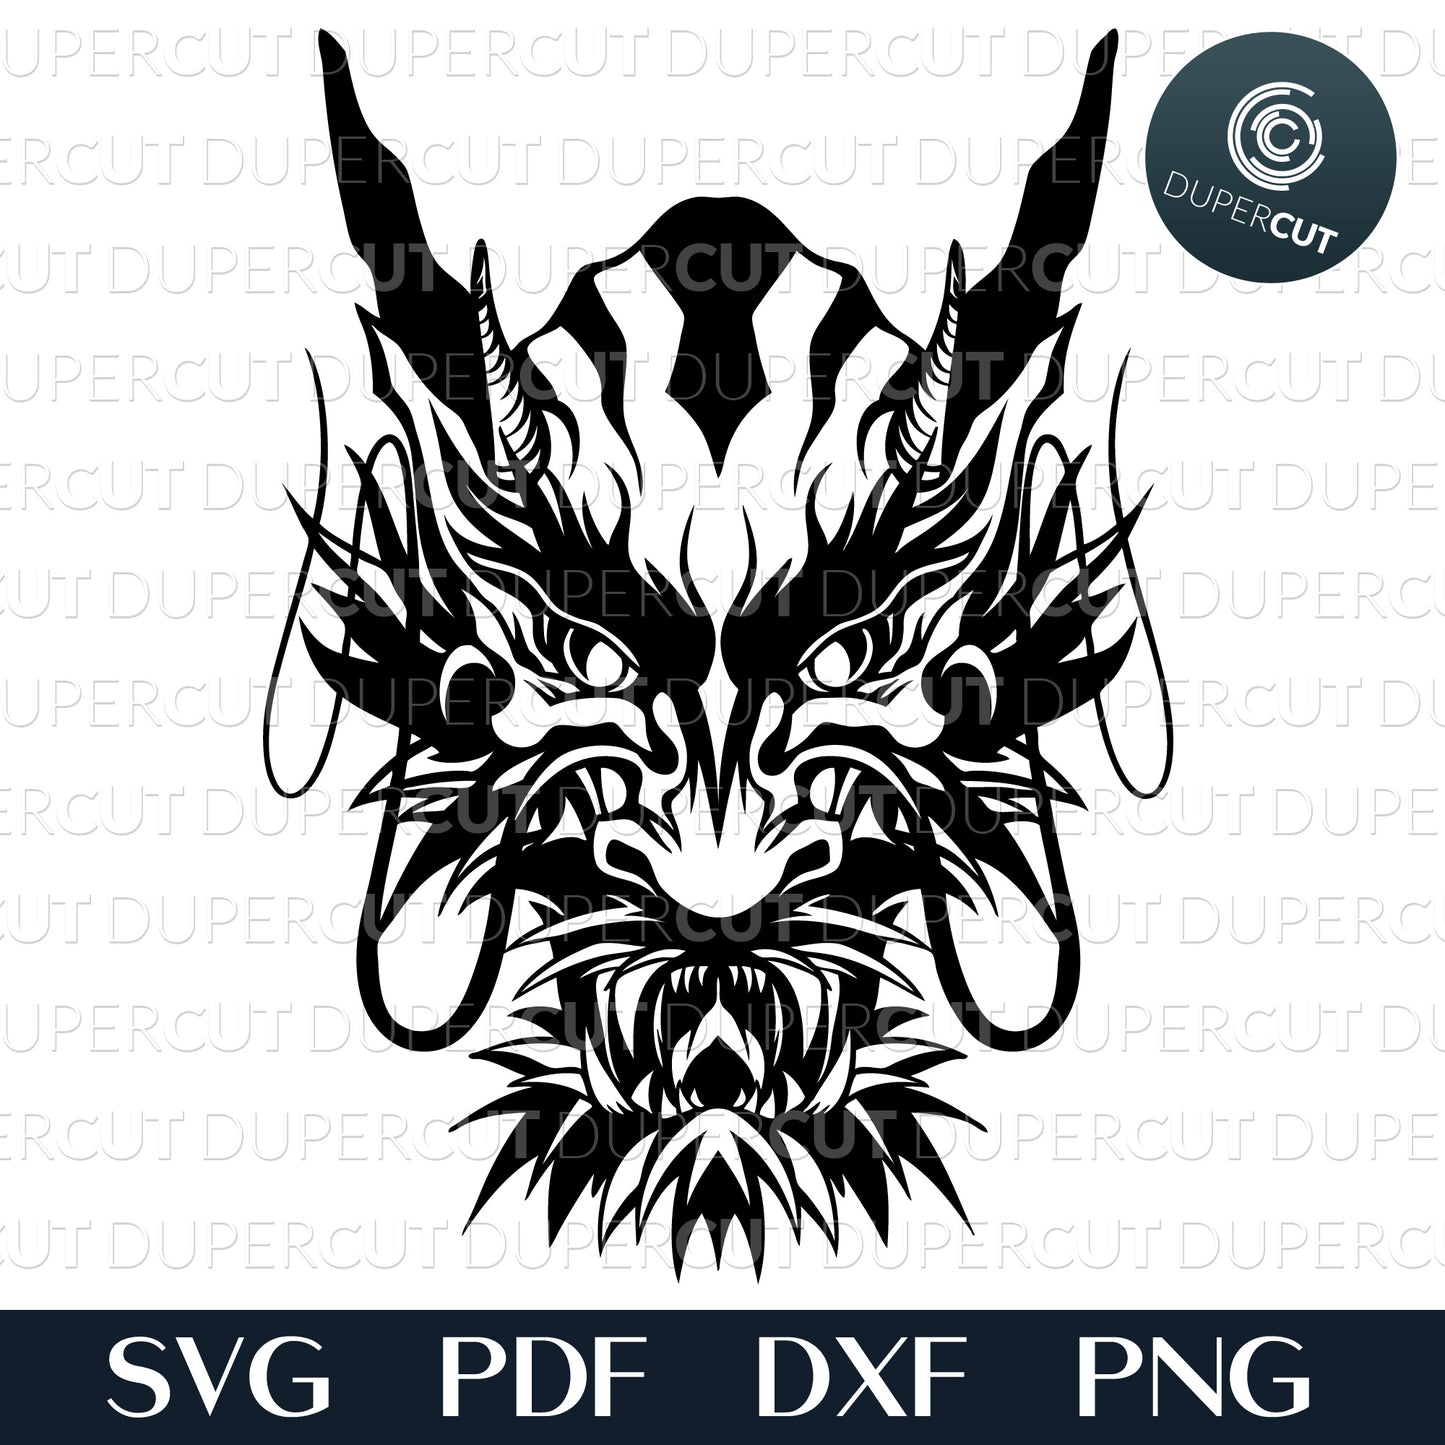 Chinese dragon devil head silhouette. Papercutting template for commercial use. SVG files for Silhouette Cameo, Cricut, Glowforge, DXF for CNC, laser cutting, print on demand